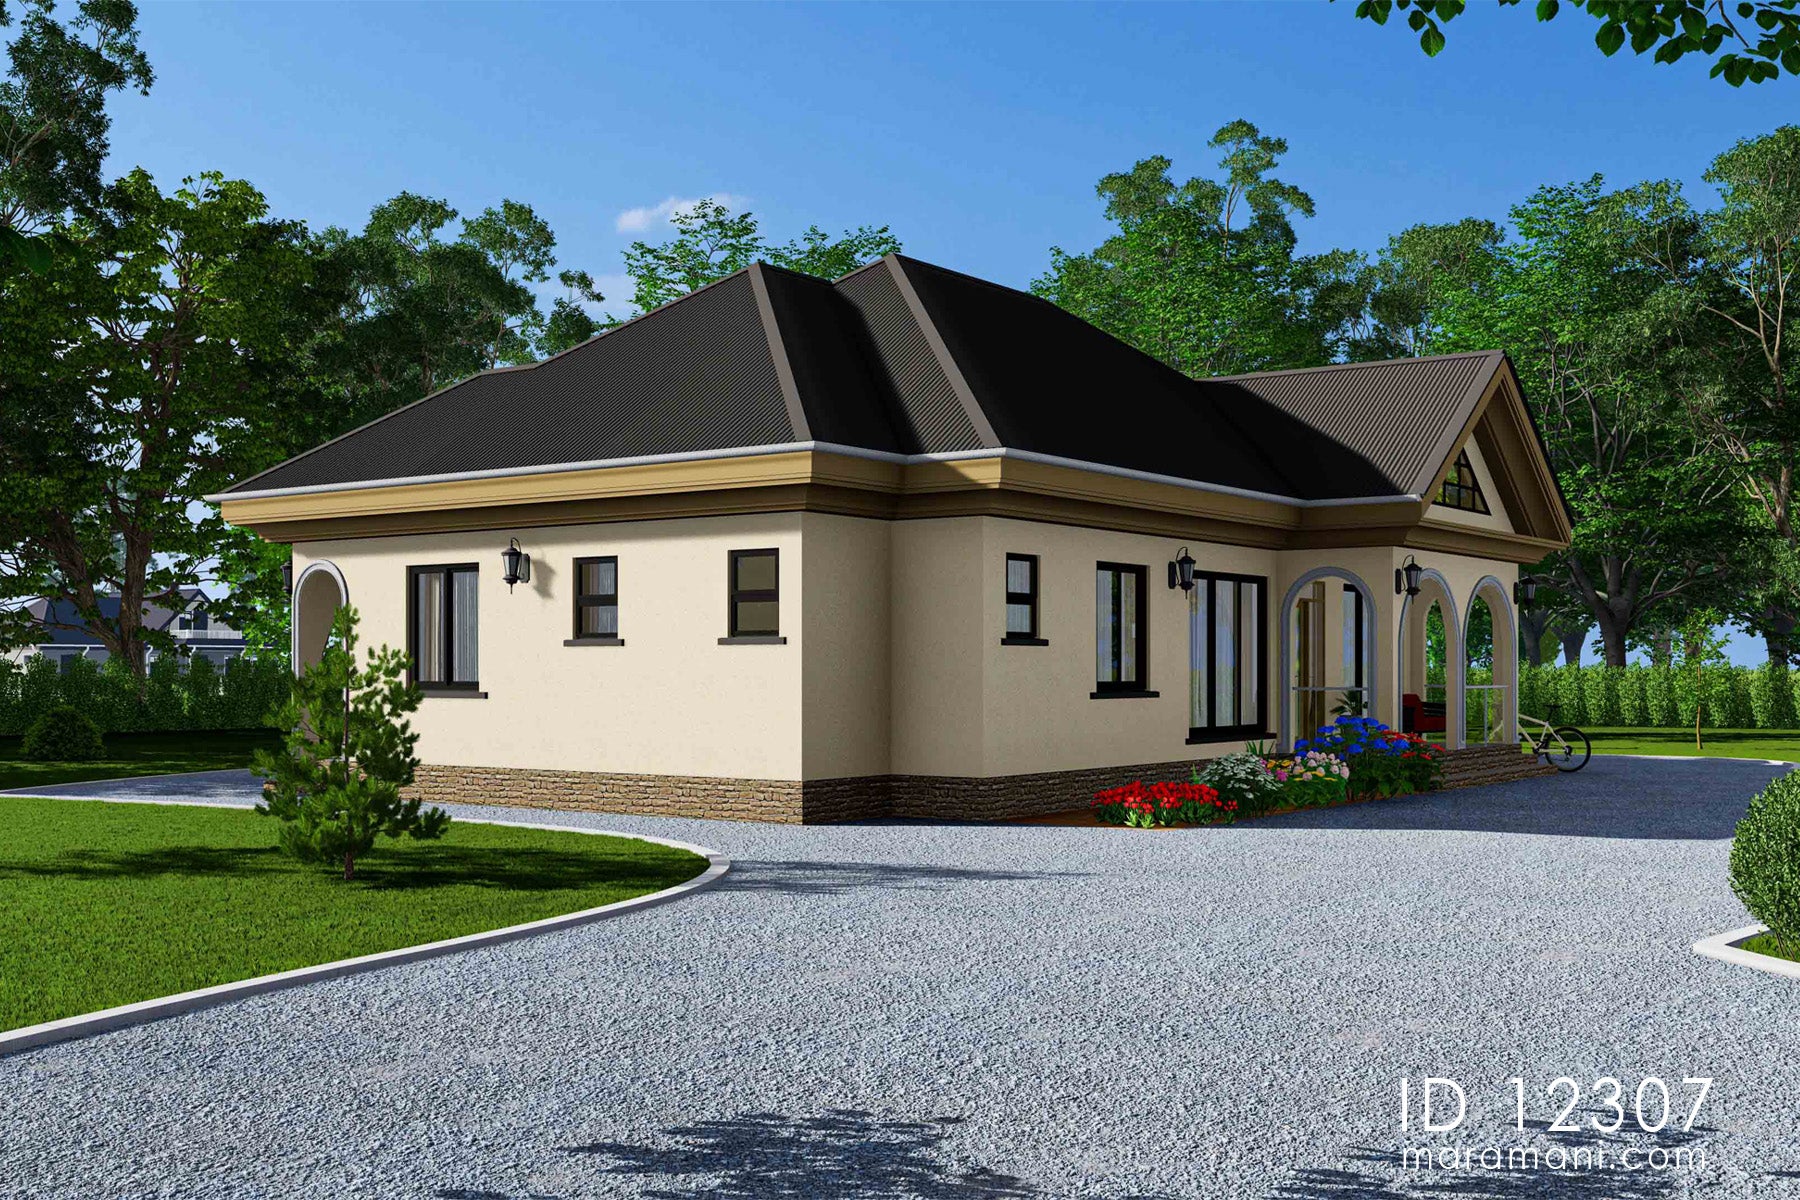 Modern affordable 2-bedroom house plan - ID 12307